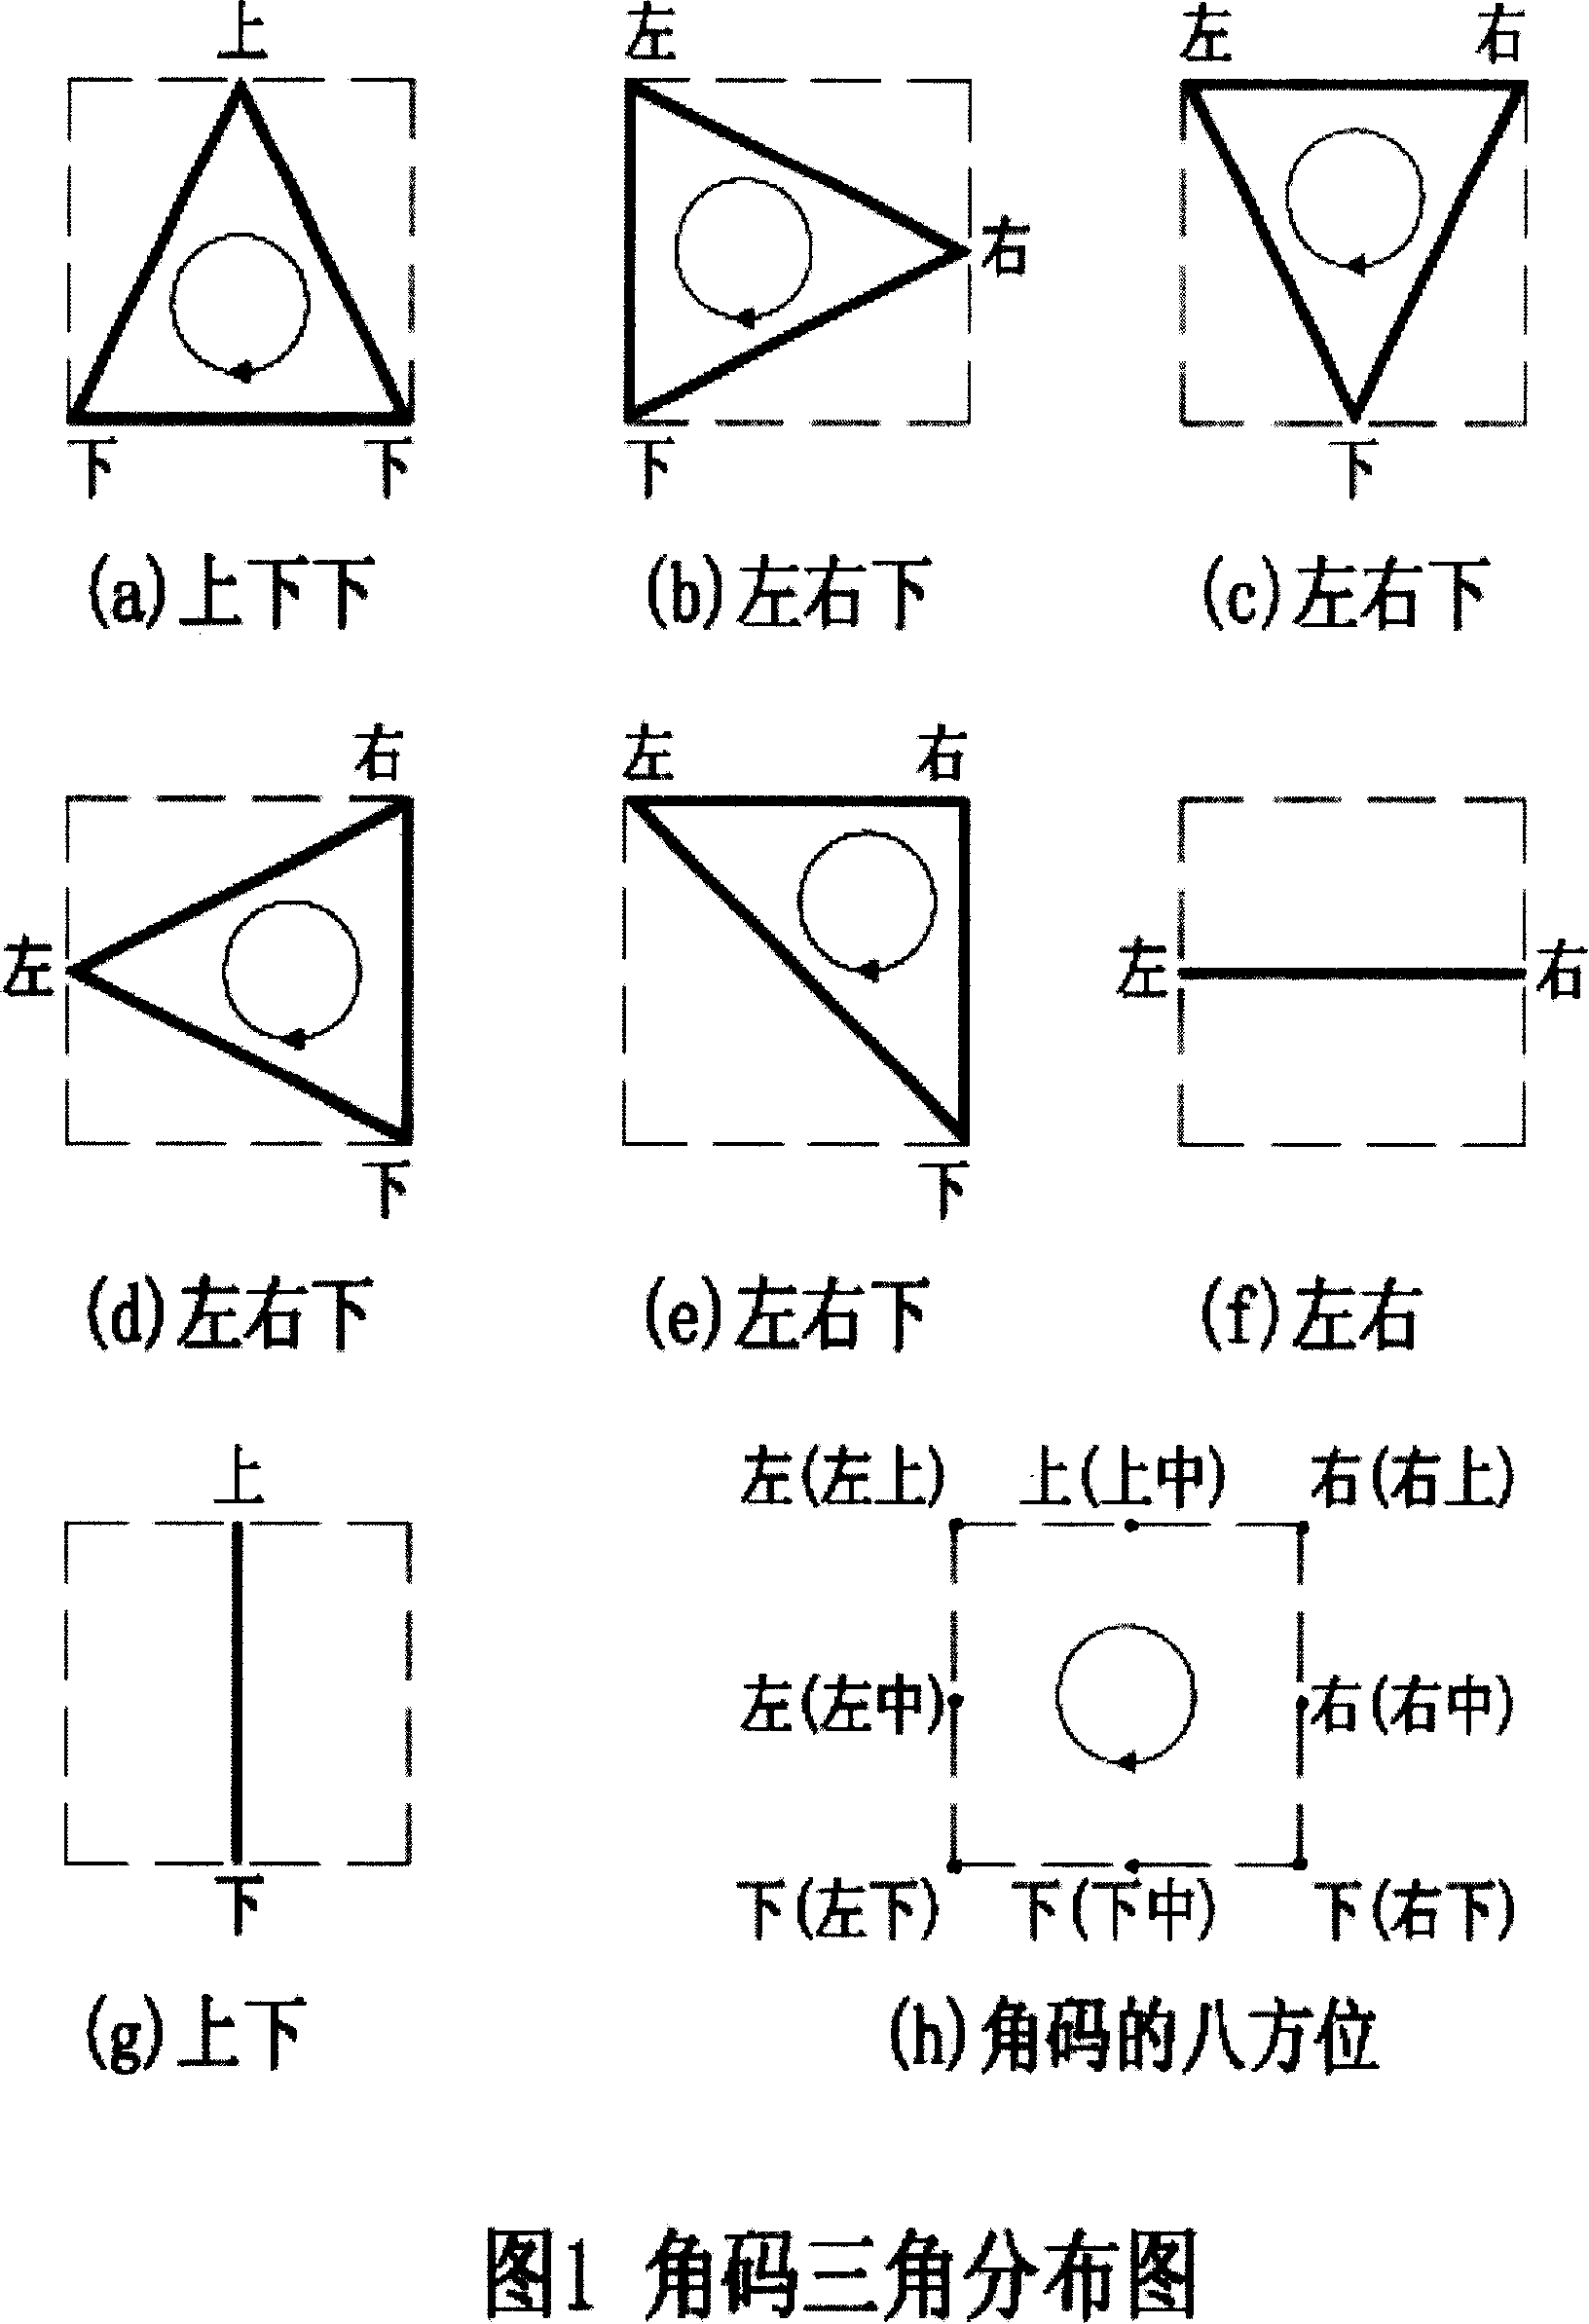 Total Chinese character duplicate code-free three-corner number code classification and input method for computer and mobile phone